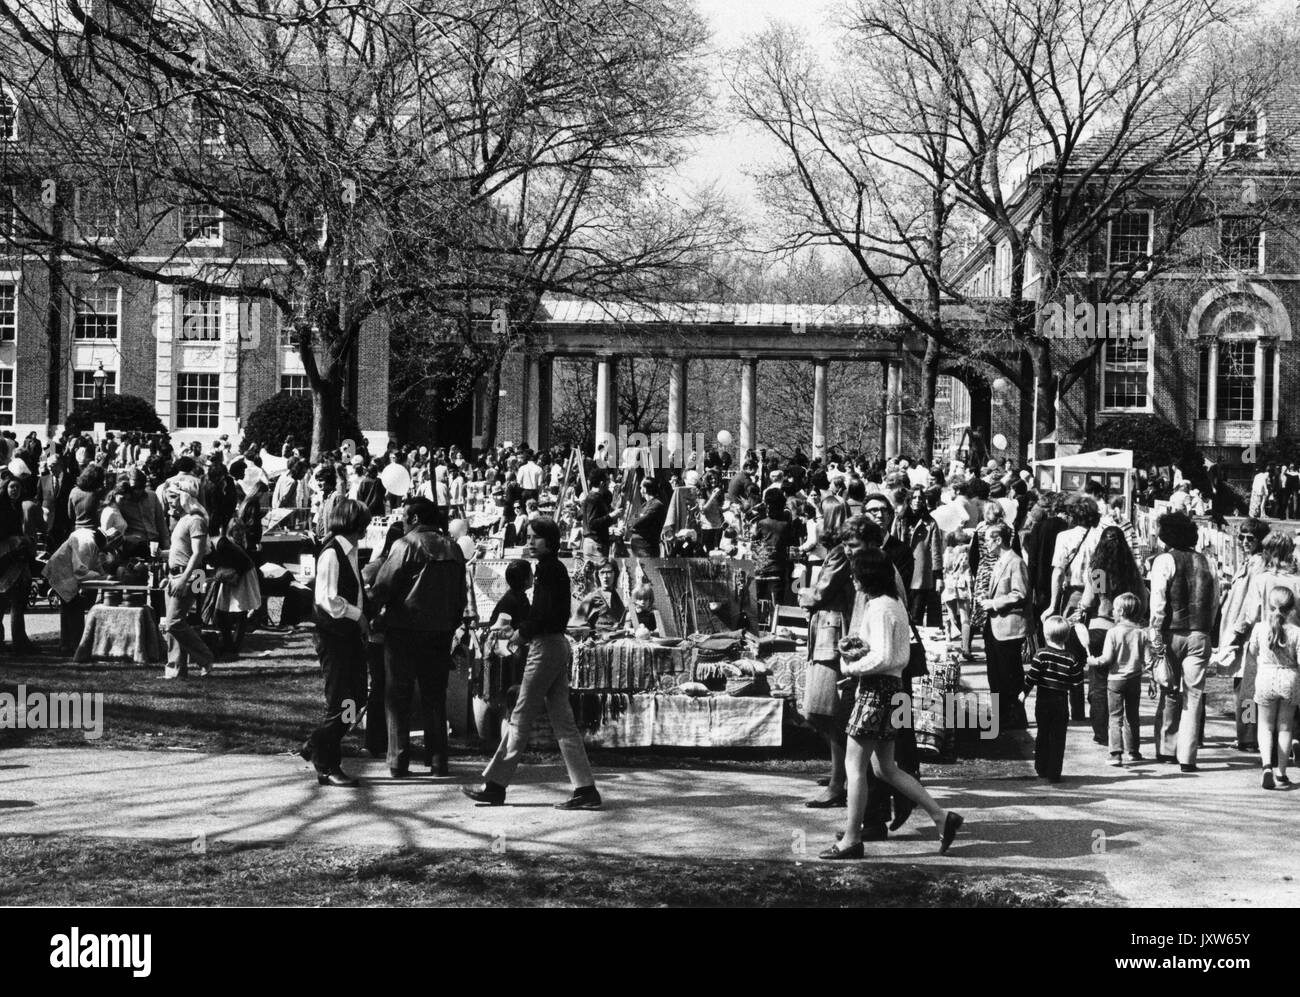 Students walking in a group at Spring Fair, a Spring carnival, outdoors, vendor tents and a large crowd in the background, at Johns Hopkins University, 1972. Stock Photo